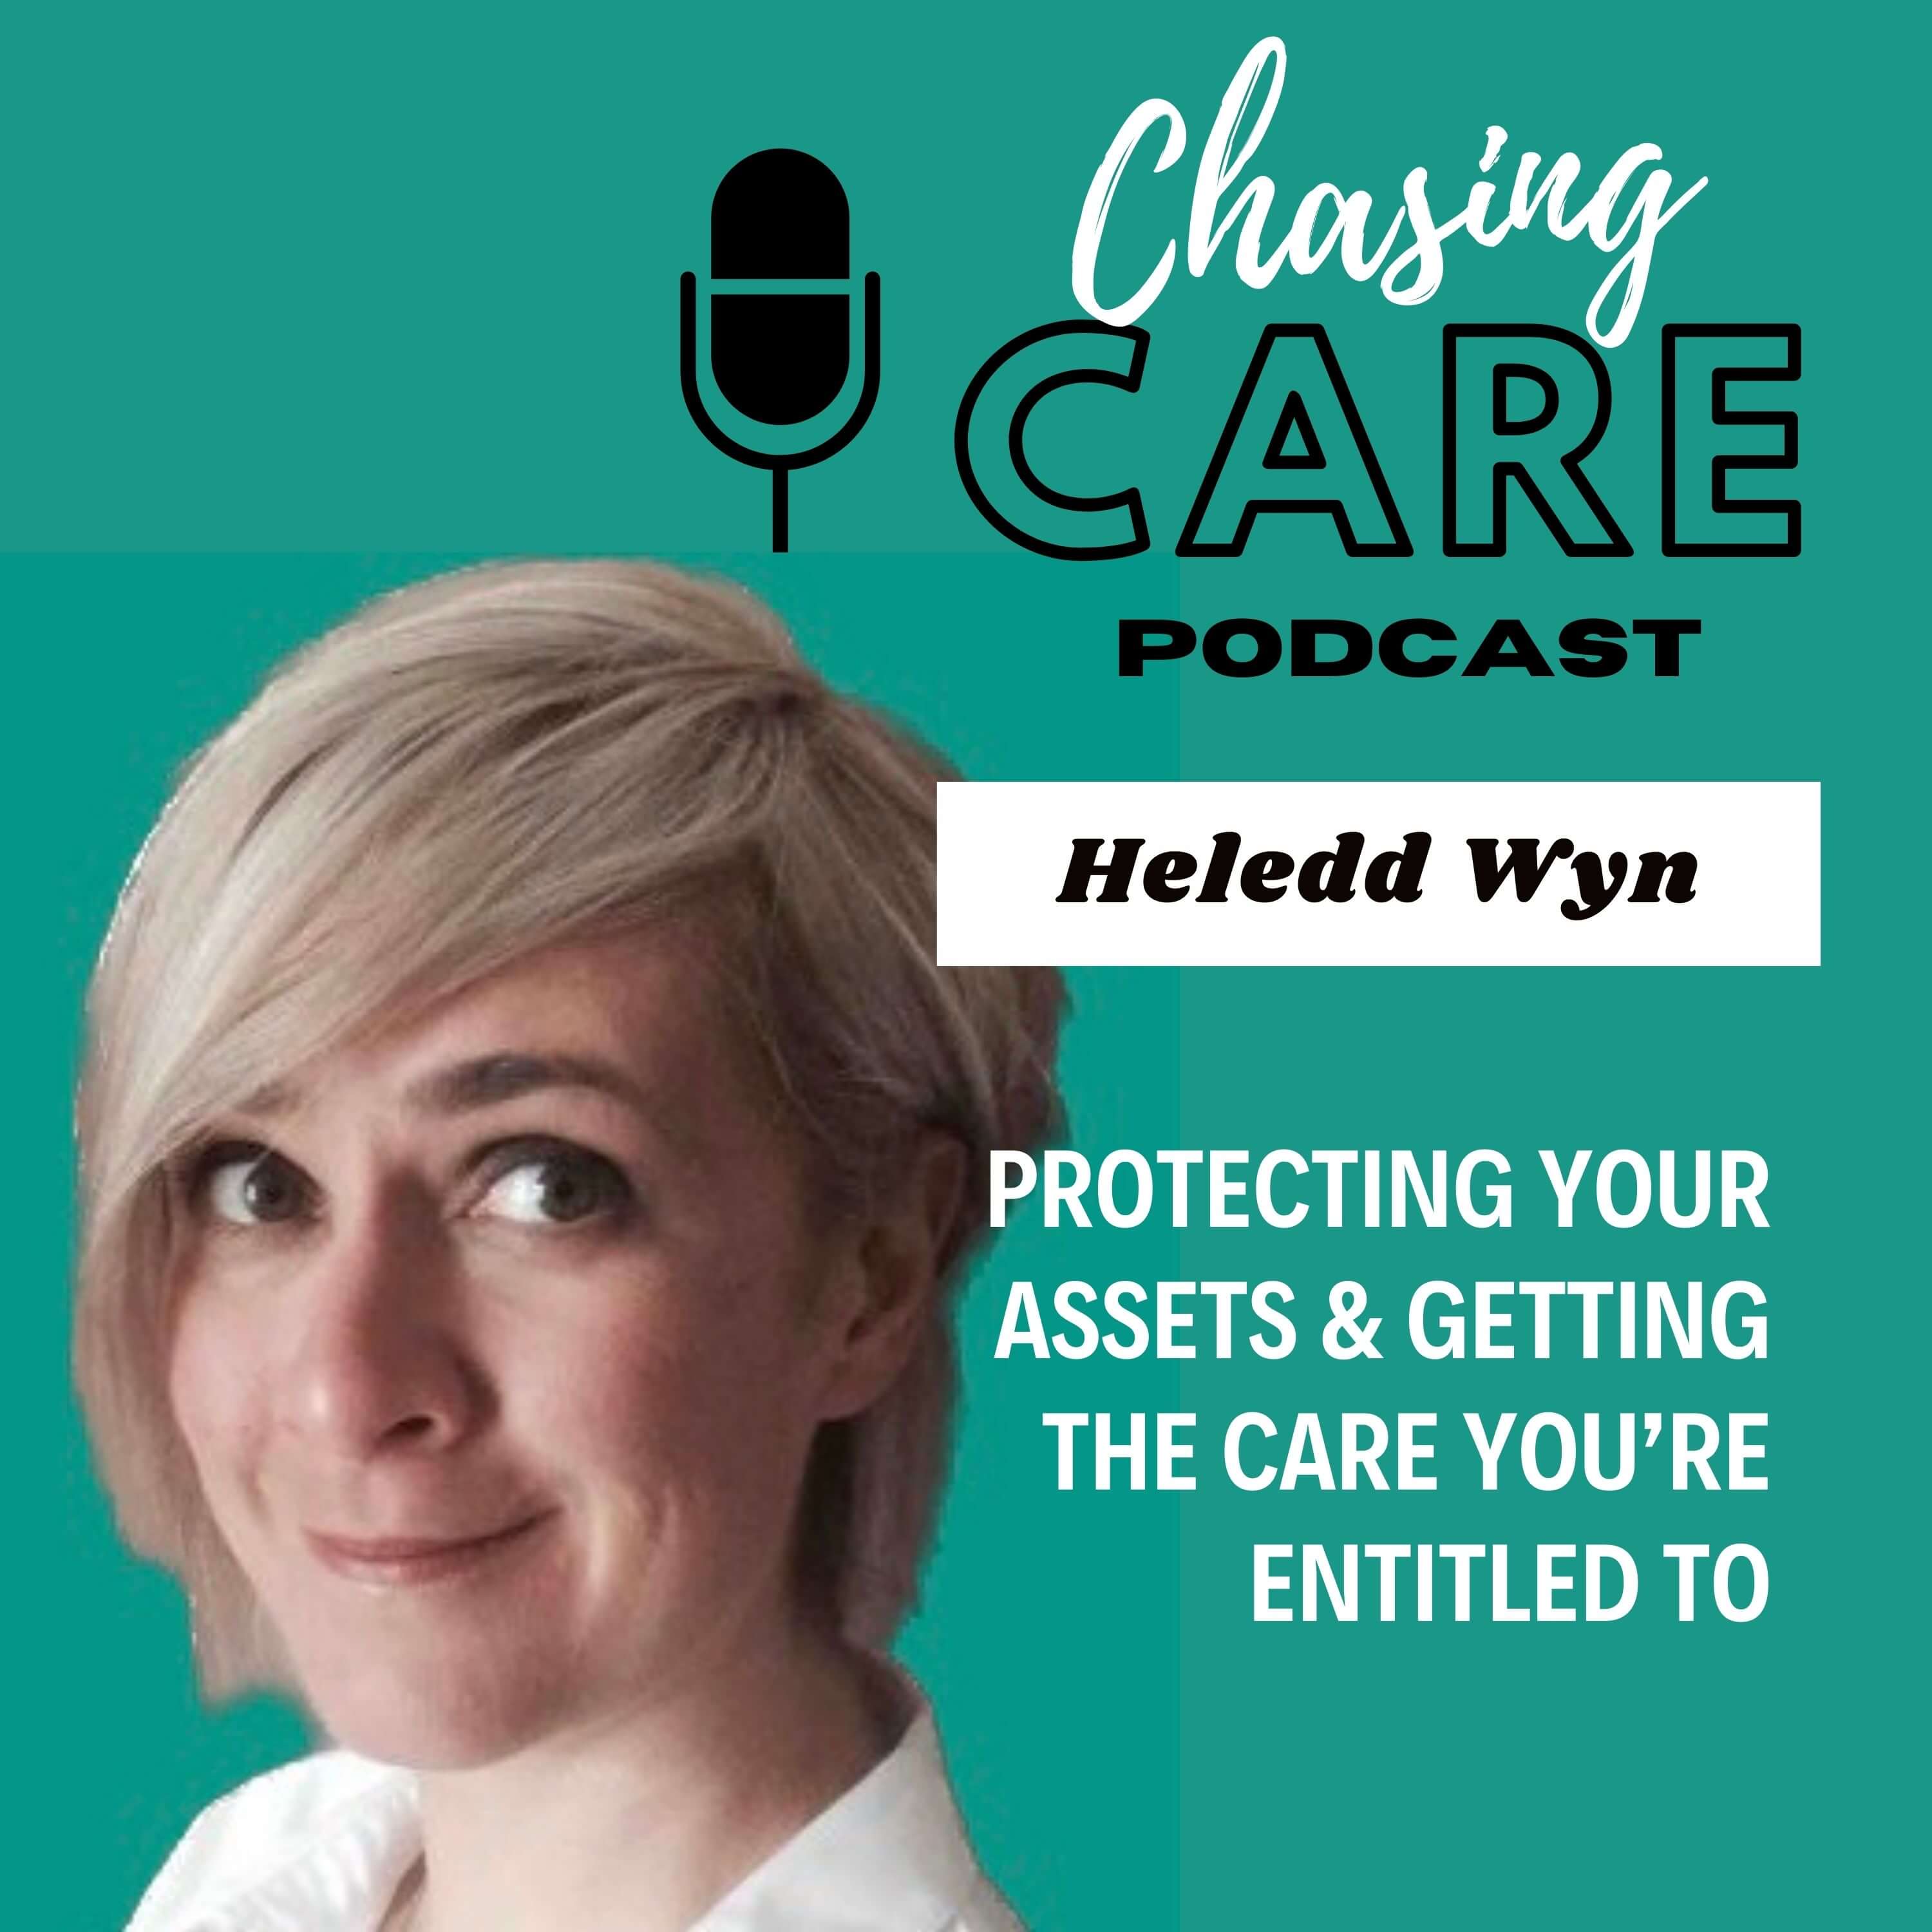 Protecting Your Assets and Get the Care You're Entitled To with Heledd Wyn of Shakespeare Martineau Live in Care podcast